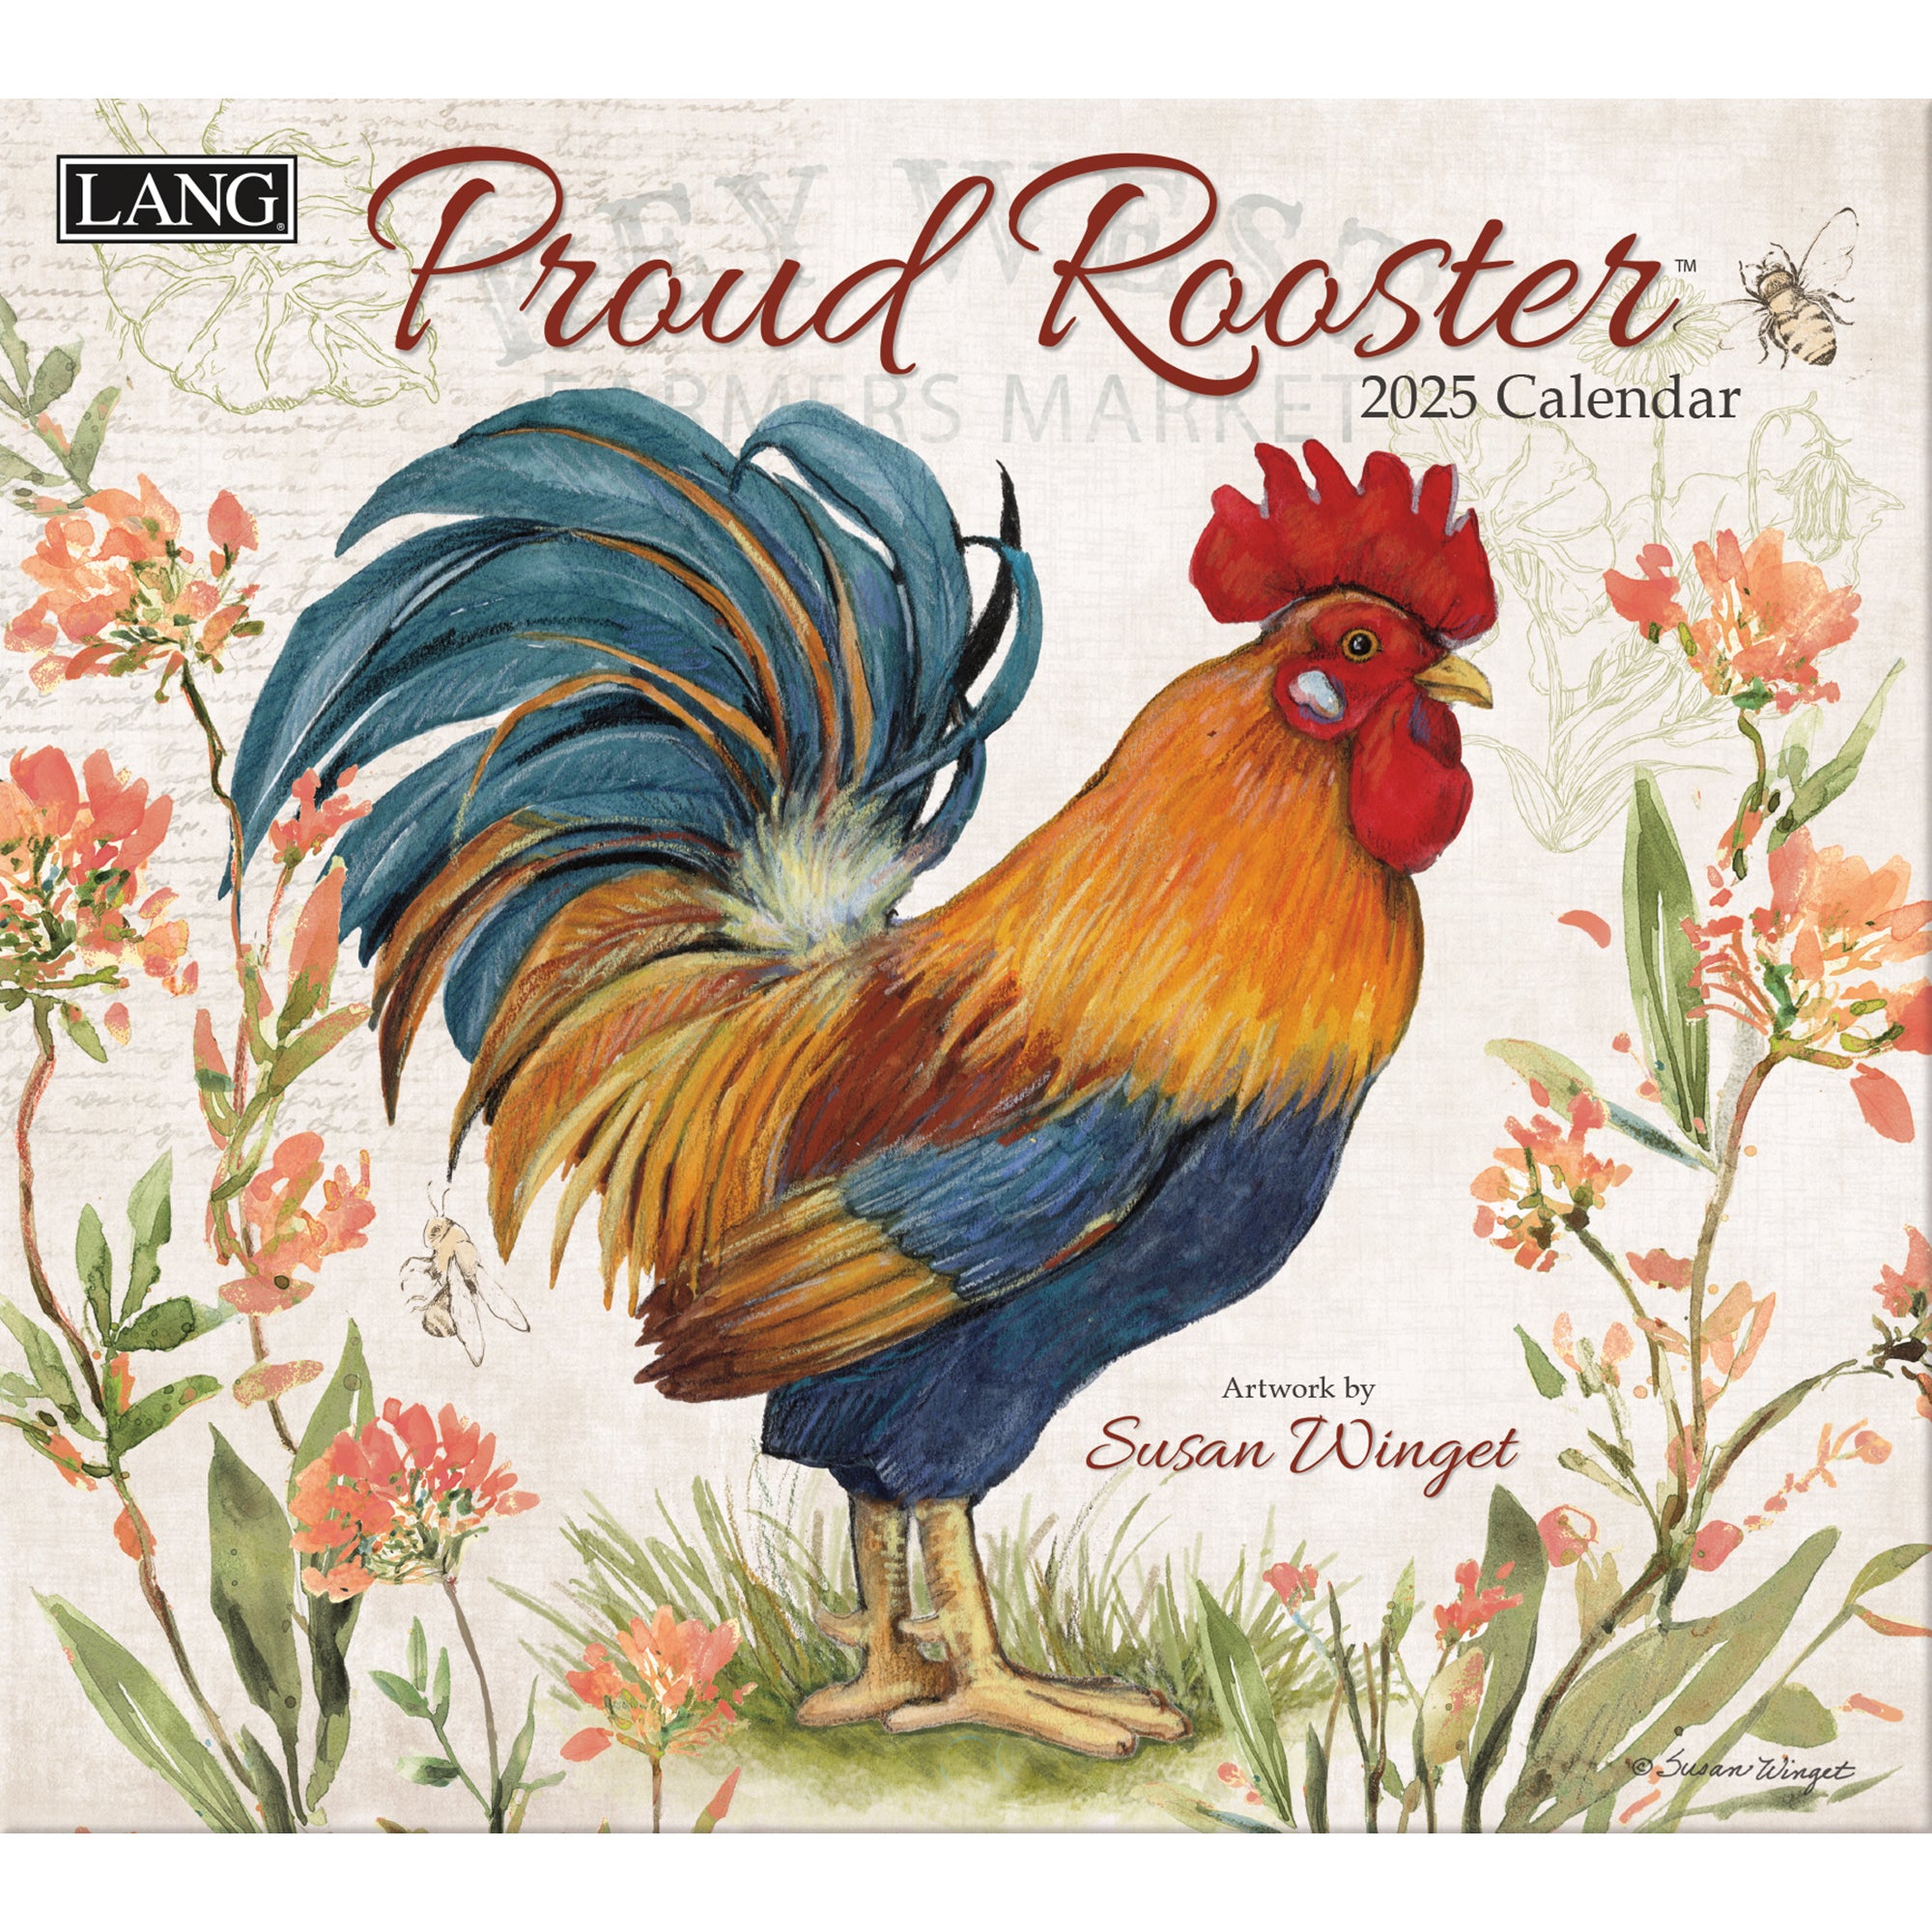 2025 LANG Proud Rooster By Susan Winget - Deluxe Wall Calendar